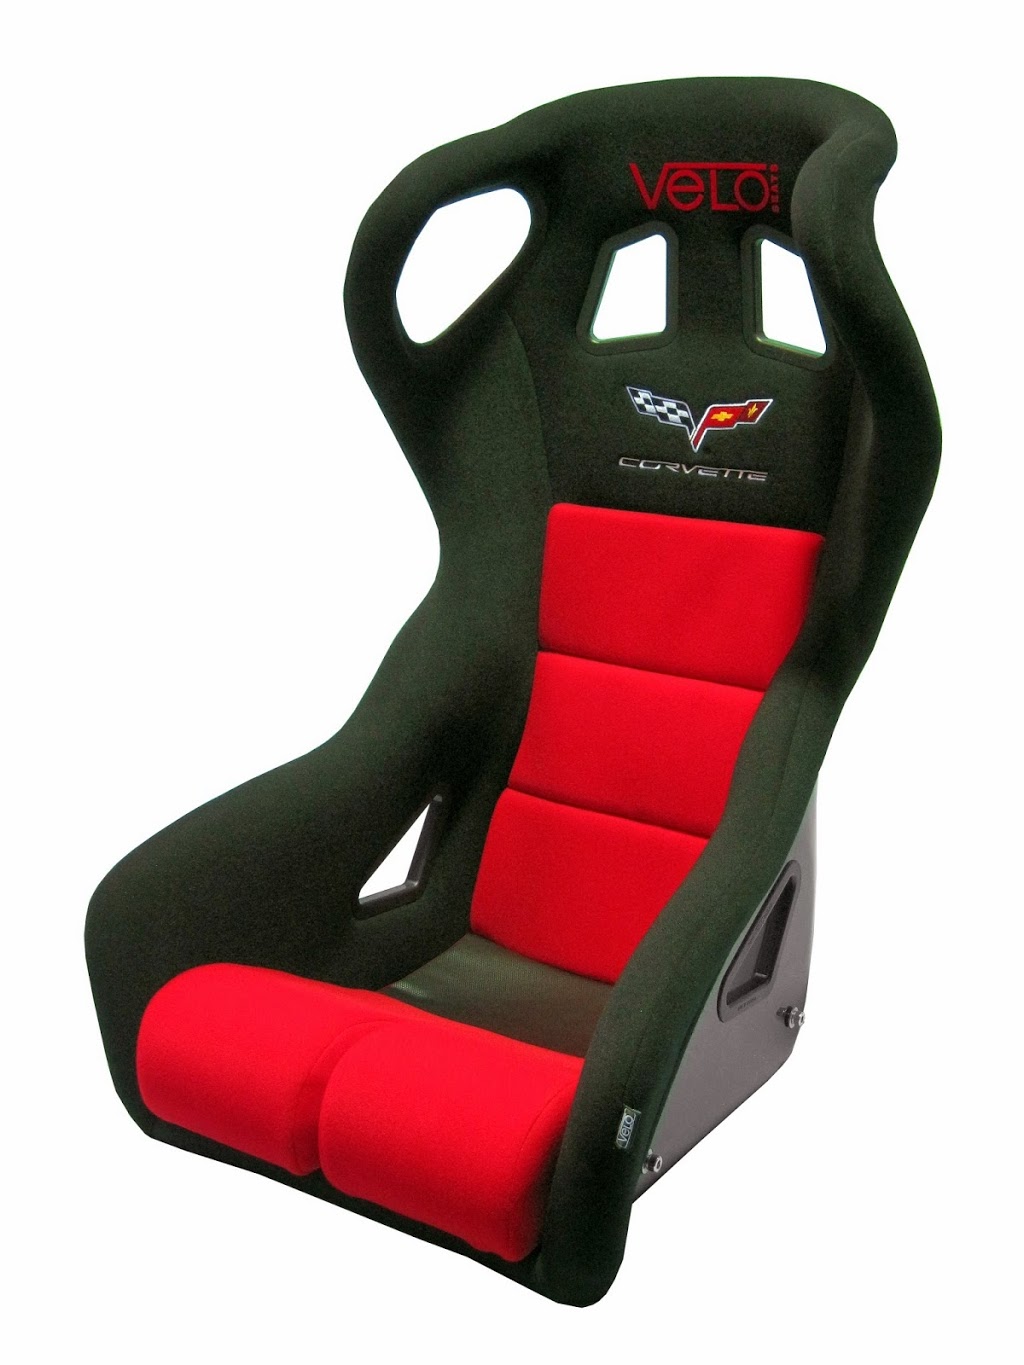 Velo Seats & Racing Products | Factory 5/26-28 Jacobsen Cres, Holden Hill SA 5088, Australia | Phone: (08) 8369 0055